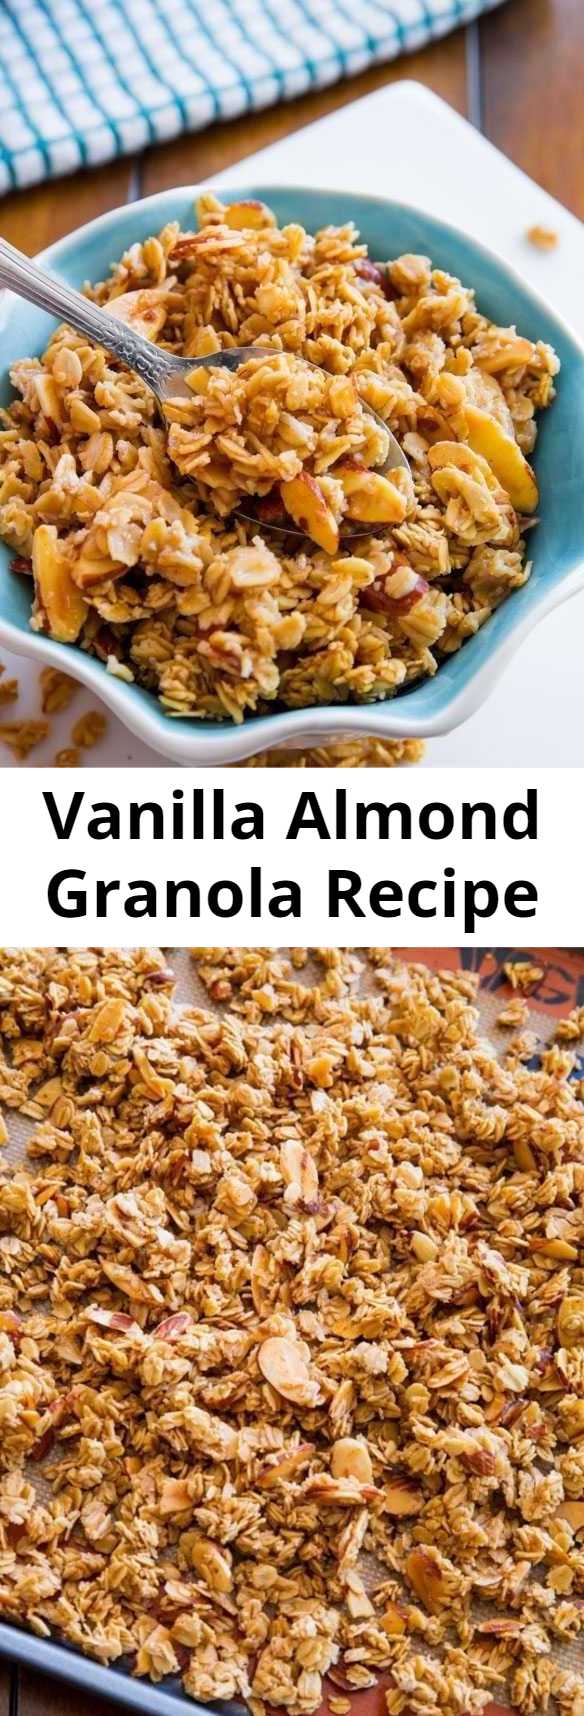 Vanilla Almond Granola Recipe - Sweet, sticky, and crunchy granola exploding with vanilla and almond flavors. Ditch store-bought, healthy homemade granola is easy! This recipe is vegan and gluten free (if using certified GF oats).